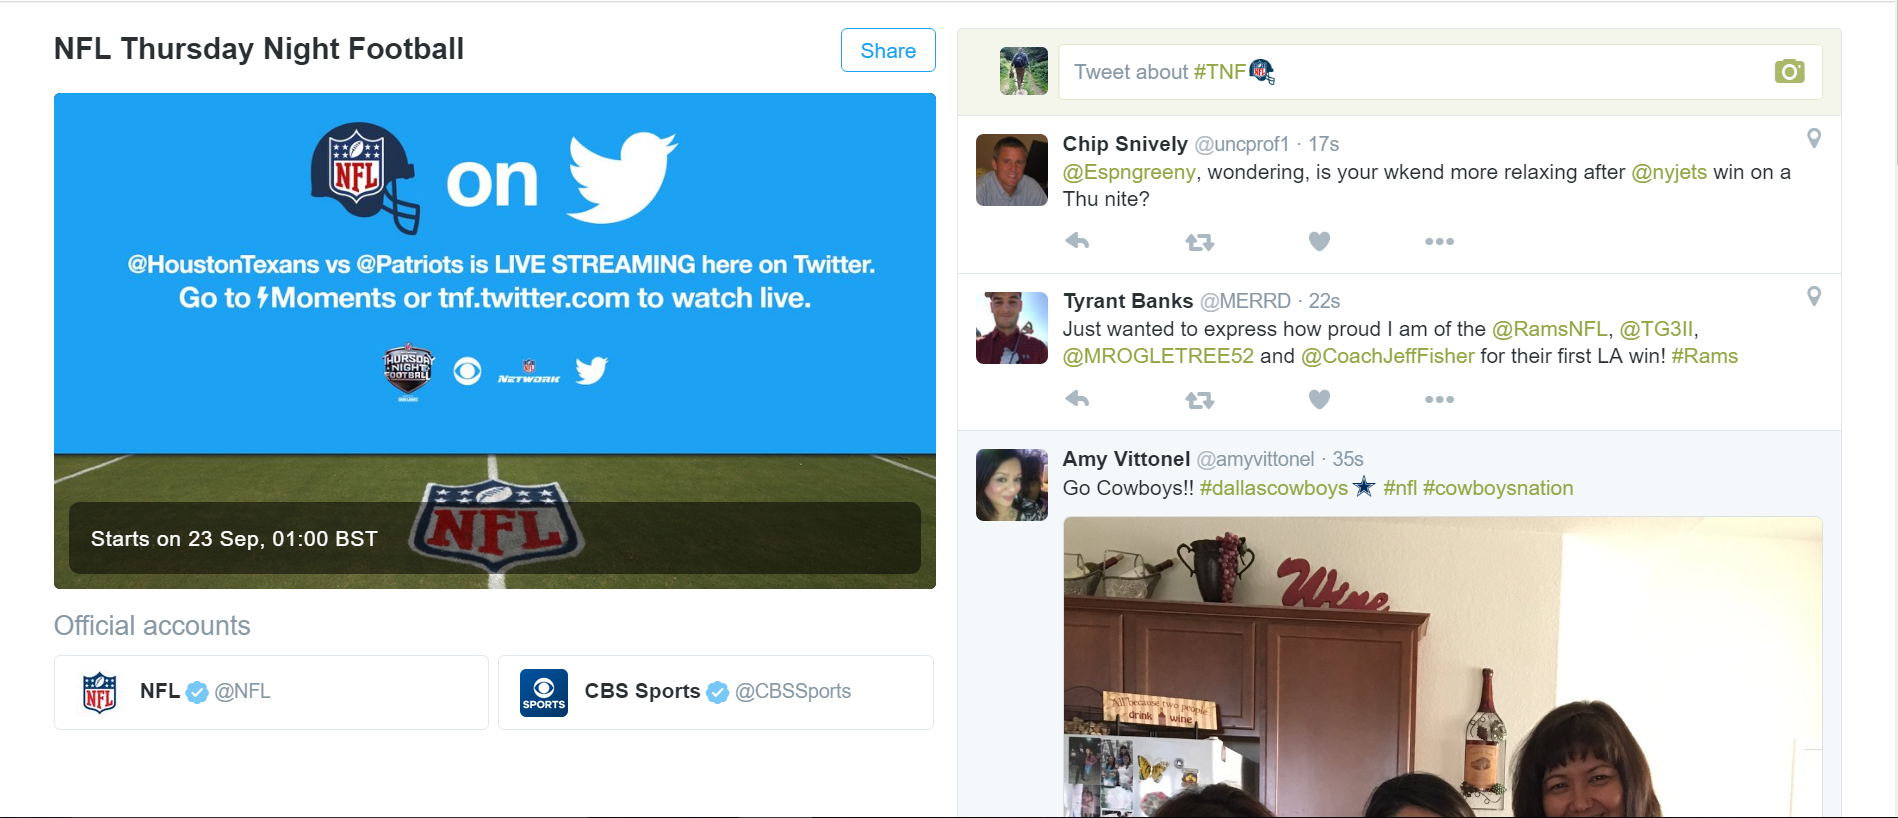 Twitters live streaming of the NFL was perfect